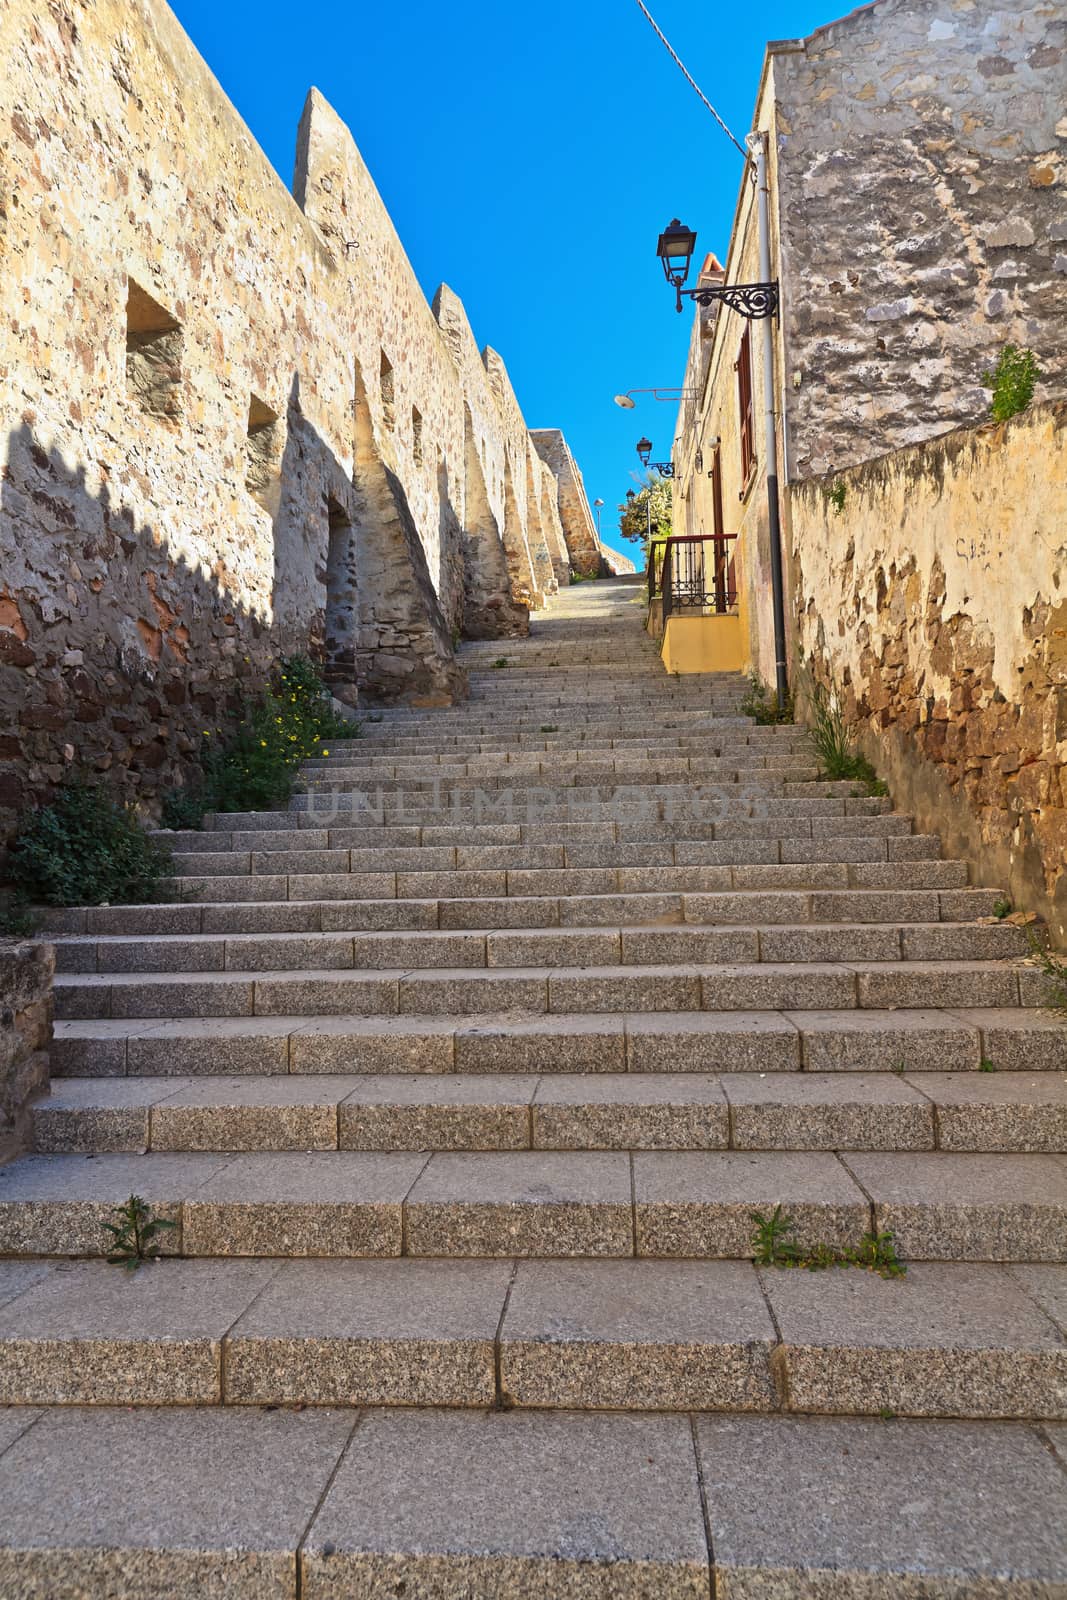 stairway and ancient walls in Carloforte, Sardinia, Italy